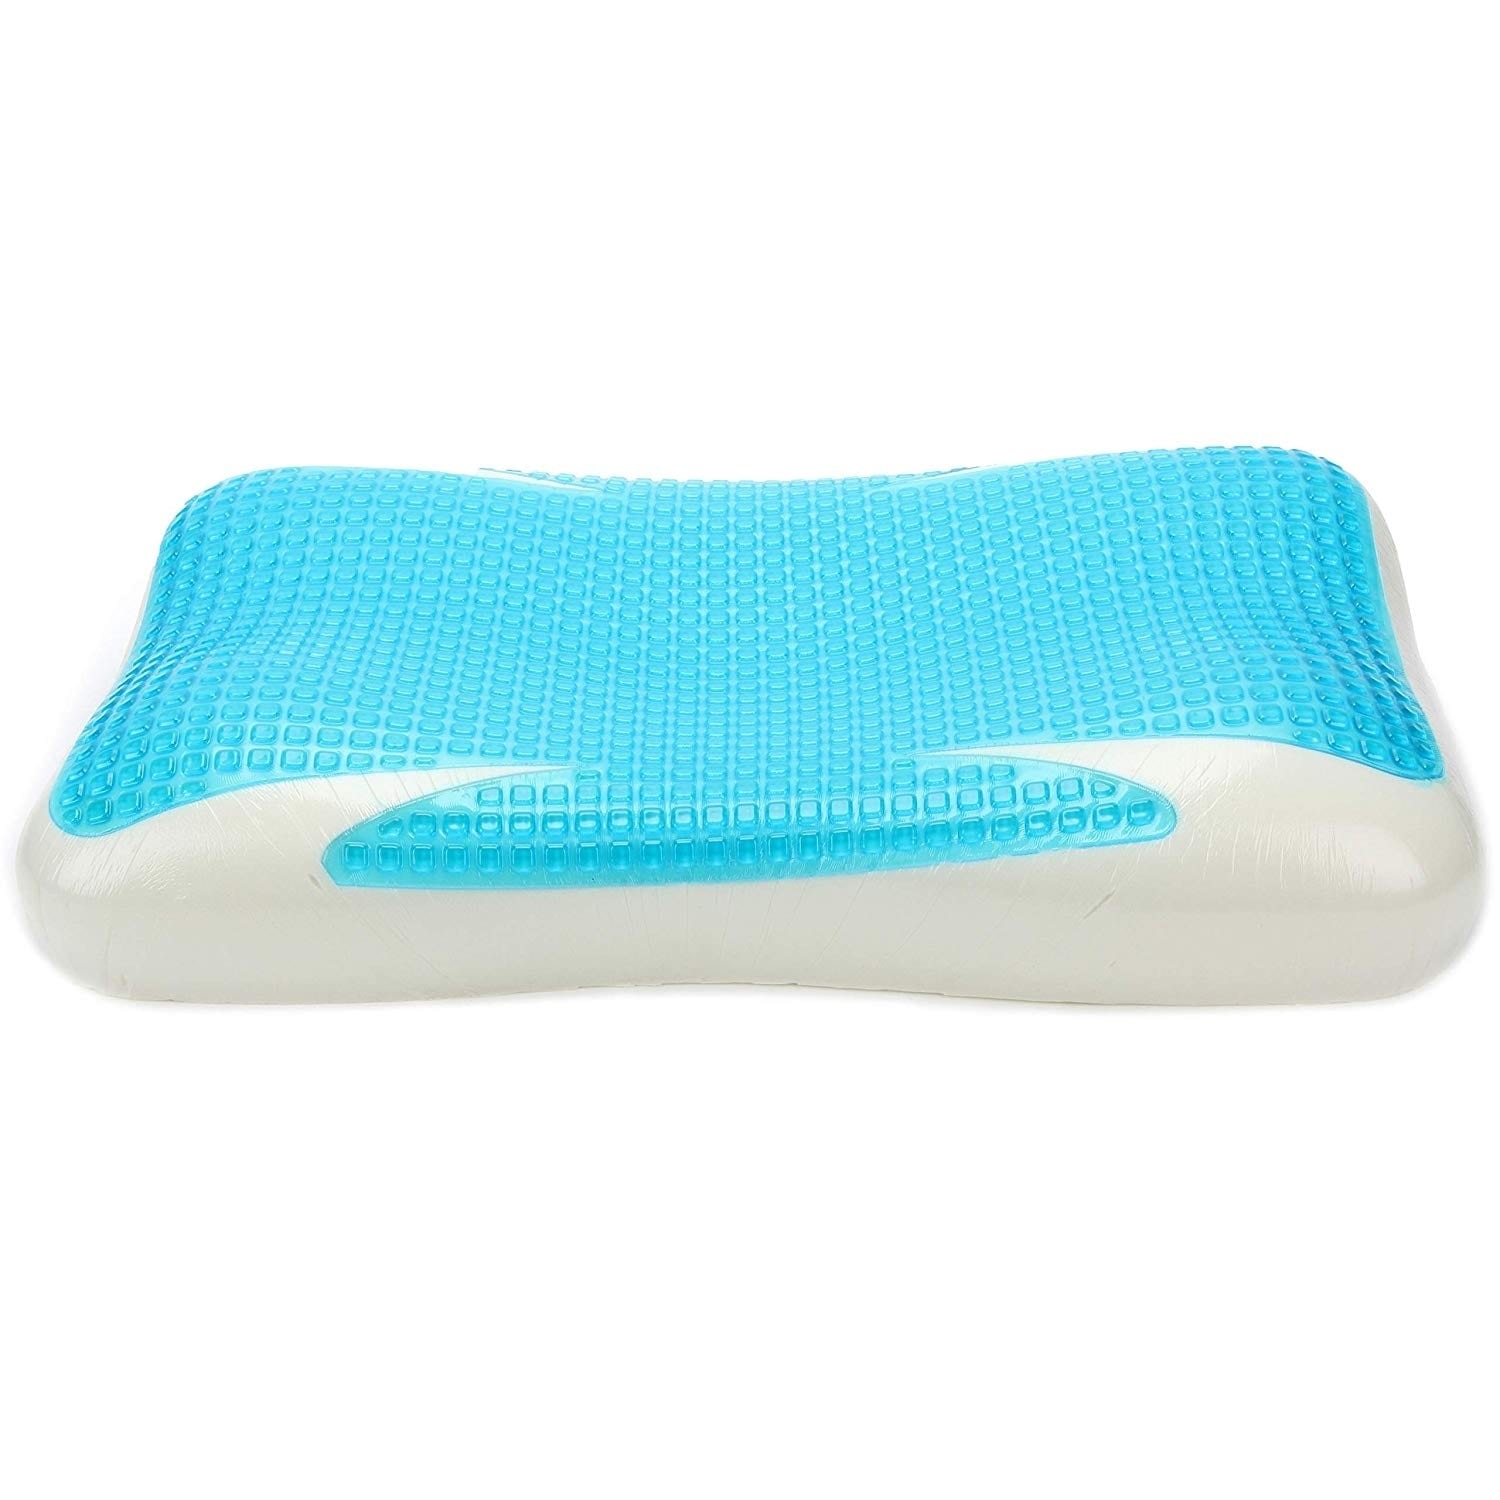 https://ak1.ostkcdn.com/images/products/23118299/Cheer-Collection-Memory-Foam-Ventilated-Cooling-Gel-Pillow-a75513f8-27a7-4d96-a89f-c8445055a0c1.jpg